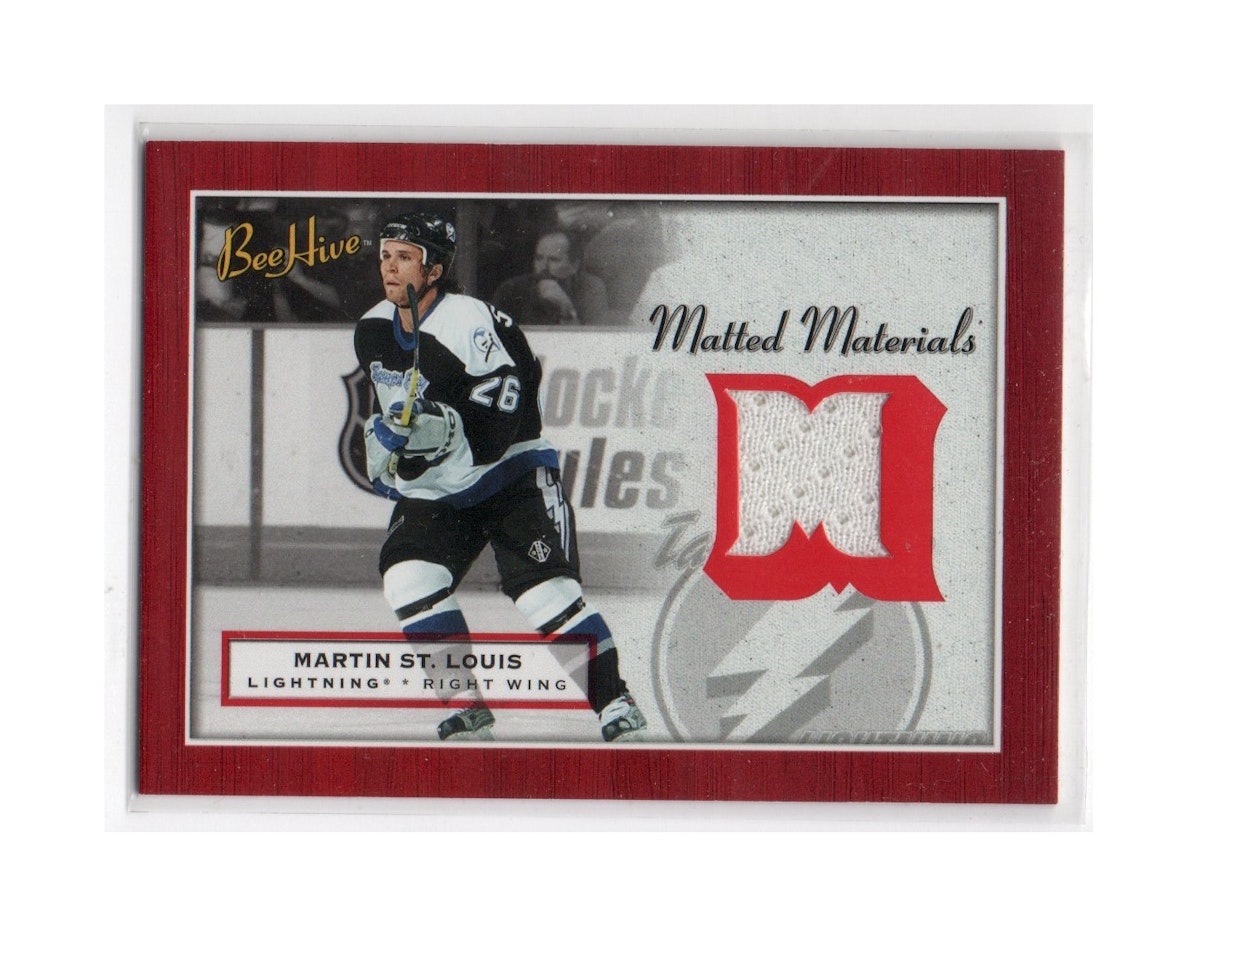 2005-06 Beehive Matted Materials #MMSL Martin St. Louis (30-X159-GAMEUSED-LIGHTNING)